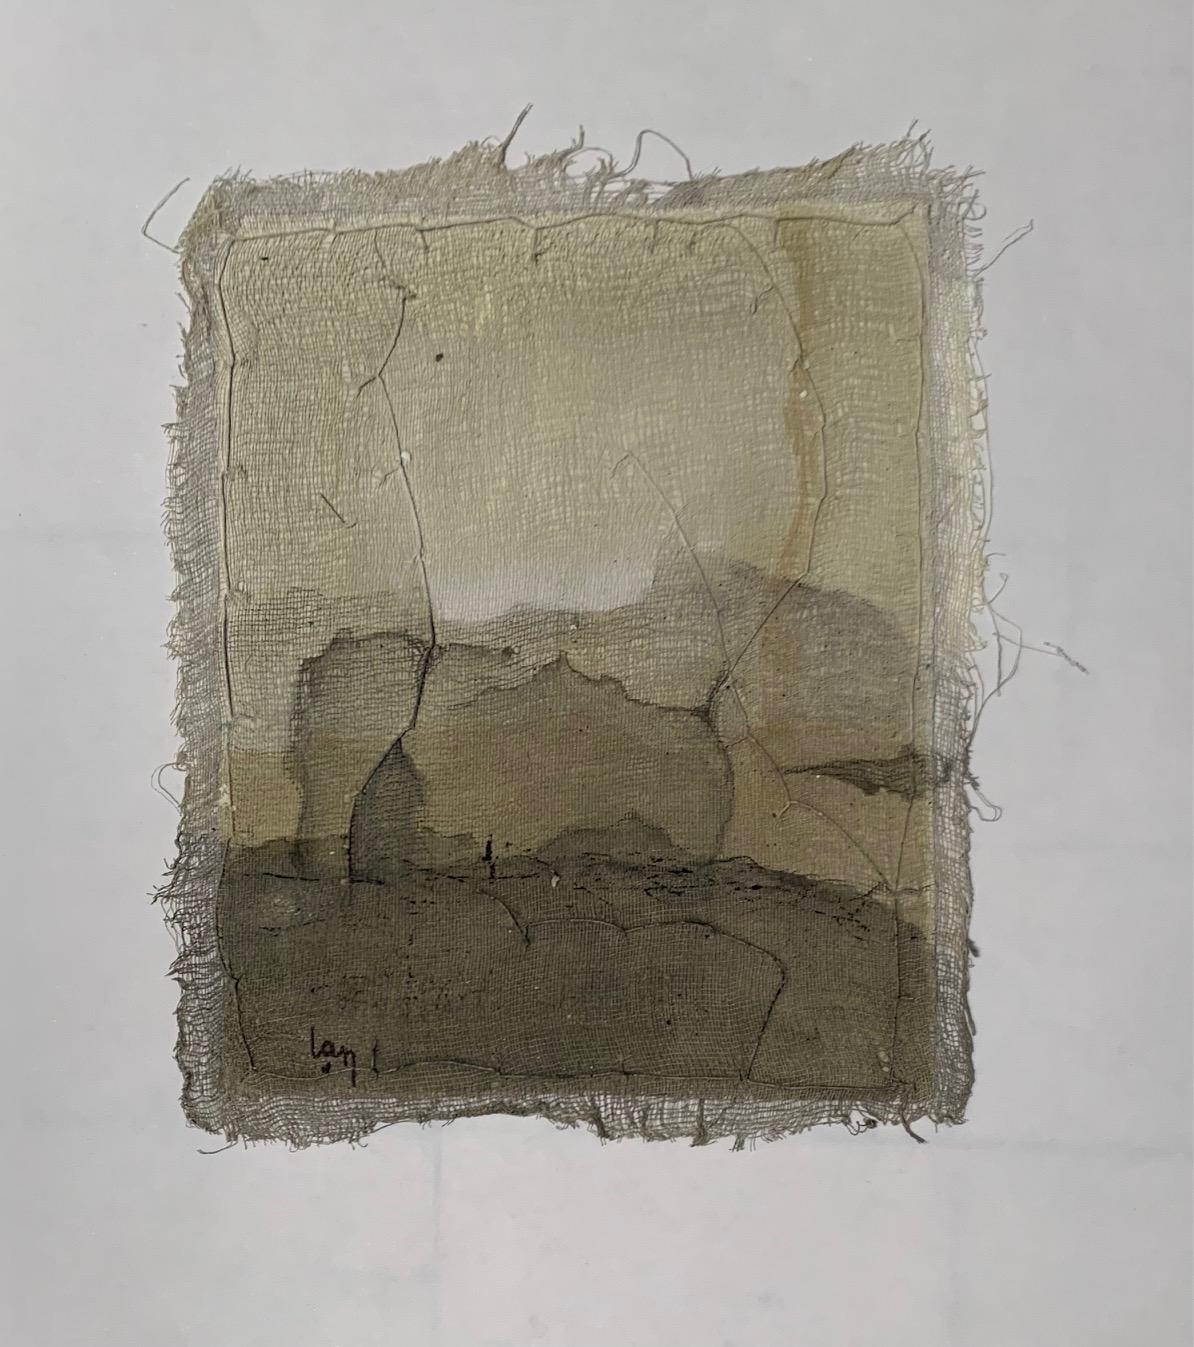 Contemporary Belgian artist Diane Petry creates her own three layer canvas using pima cotton, gauze and fine paper.
Colors are shade olive with neutrals.
Raw edges and applied threads add texture and dimension to the acrylic painting.
All artwork